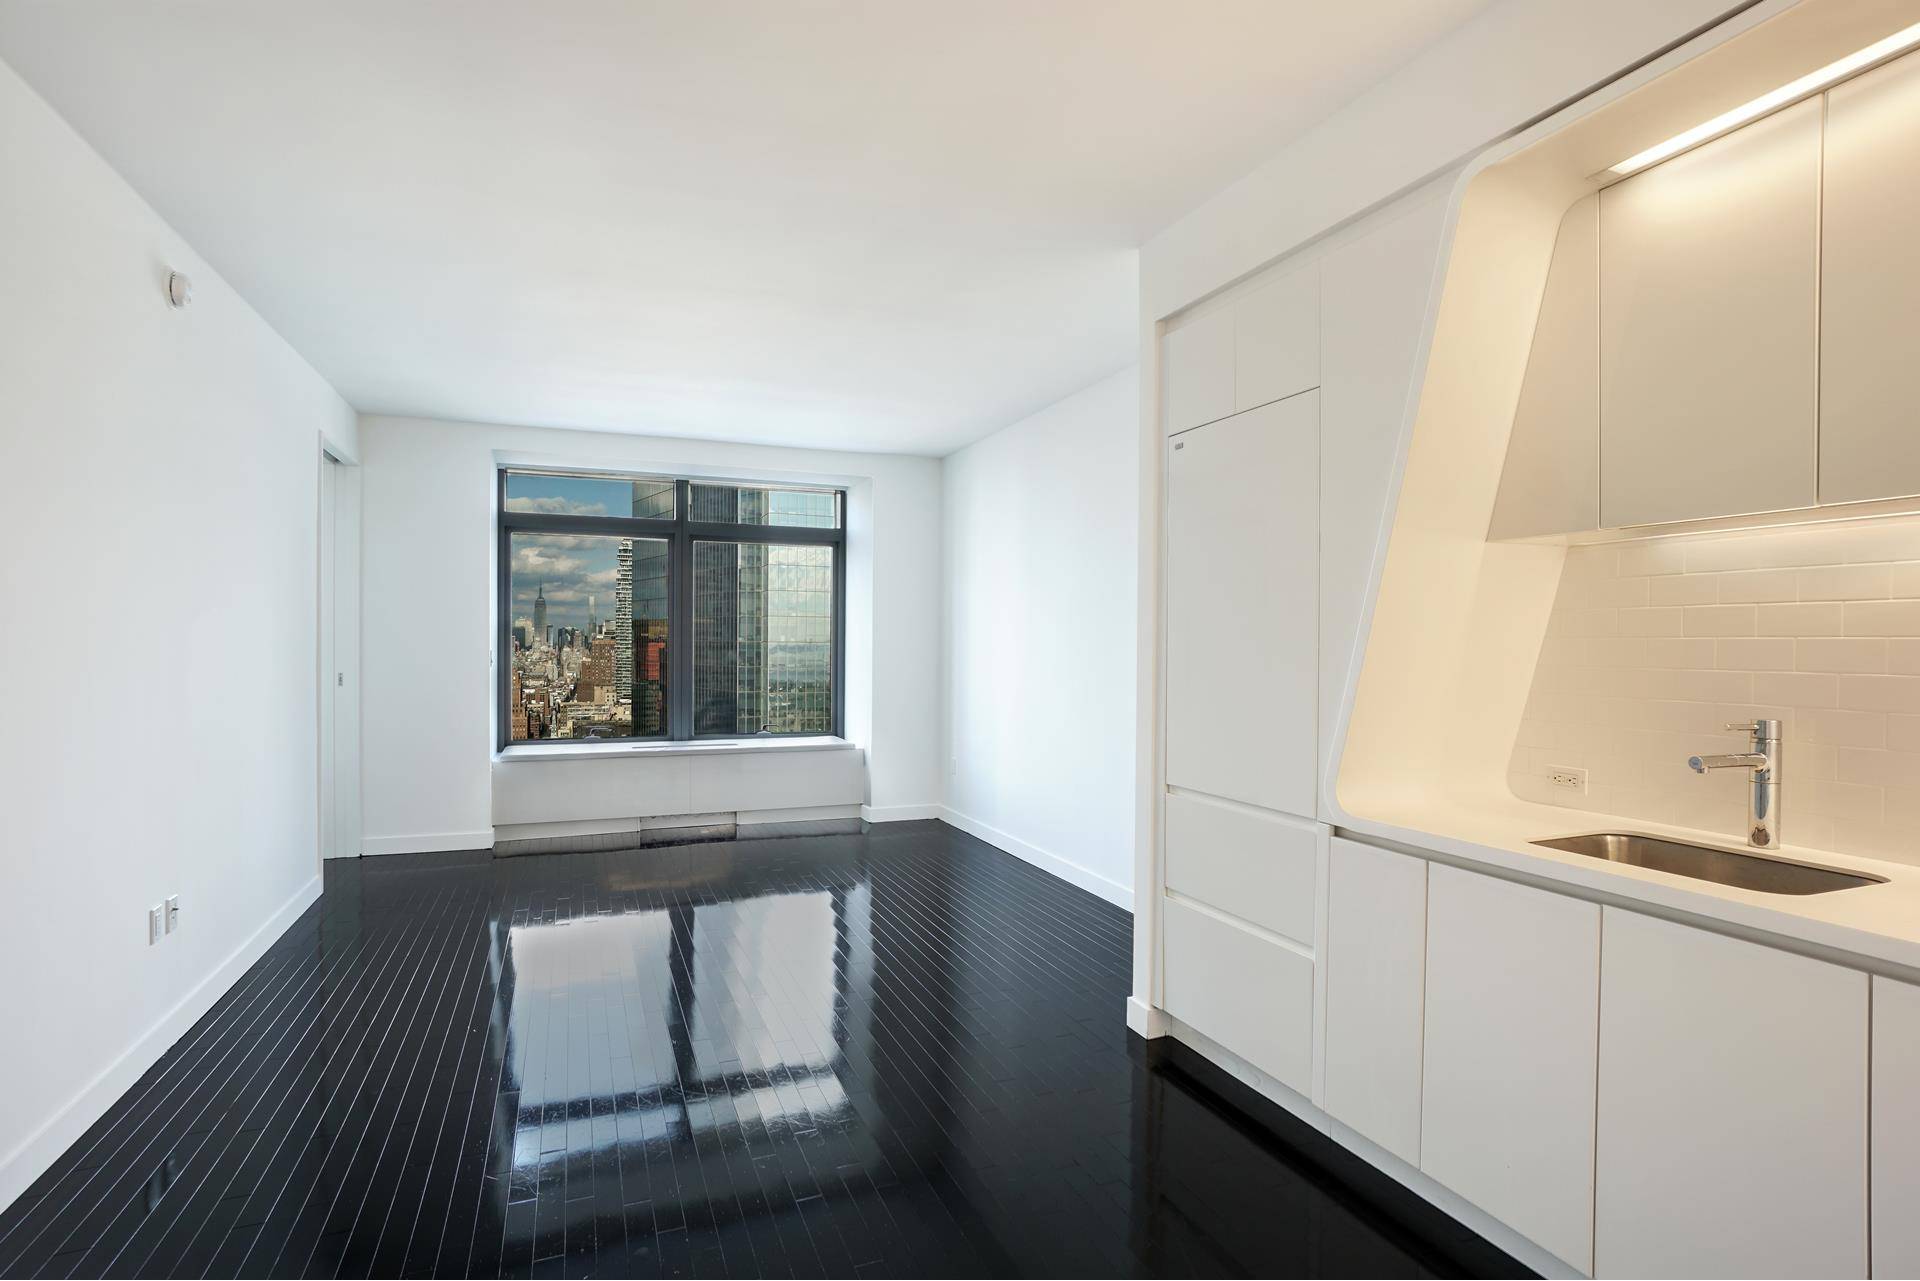 Impeccably styled one bedroom apartment on a high floor with stunning northern views of NYC's skyline, 9 11 Memorial Park, Statue of Liberty, and beyond.